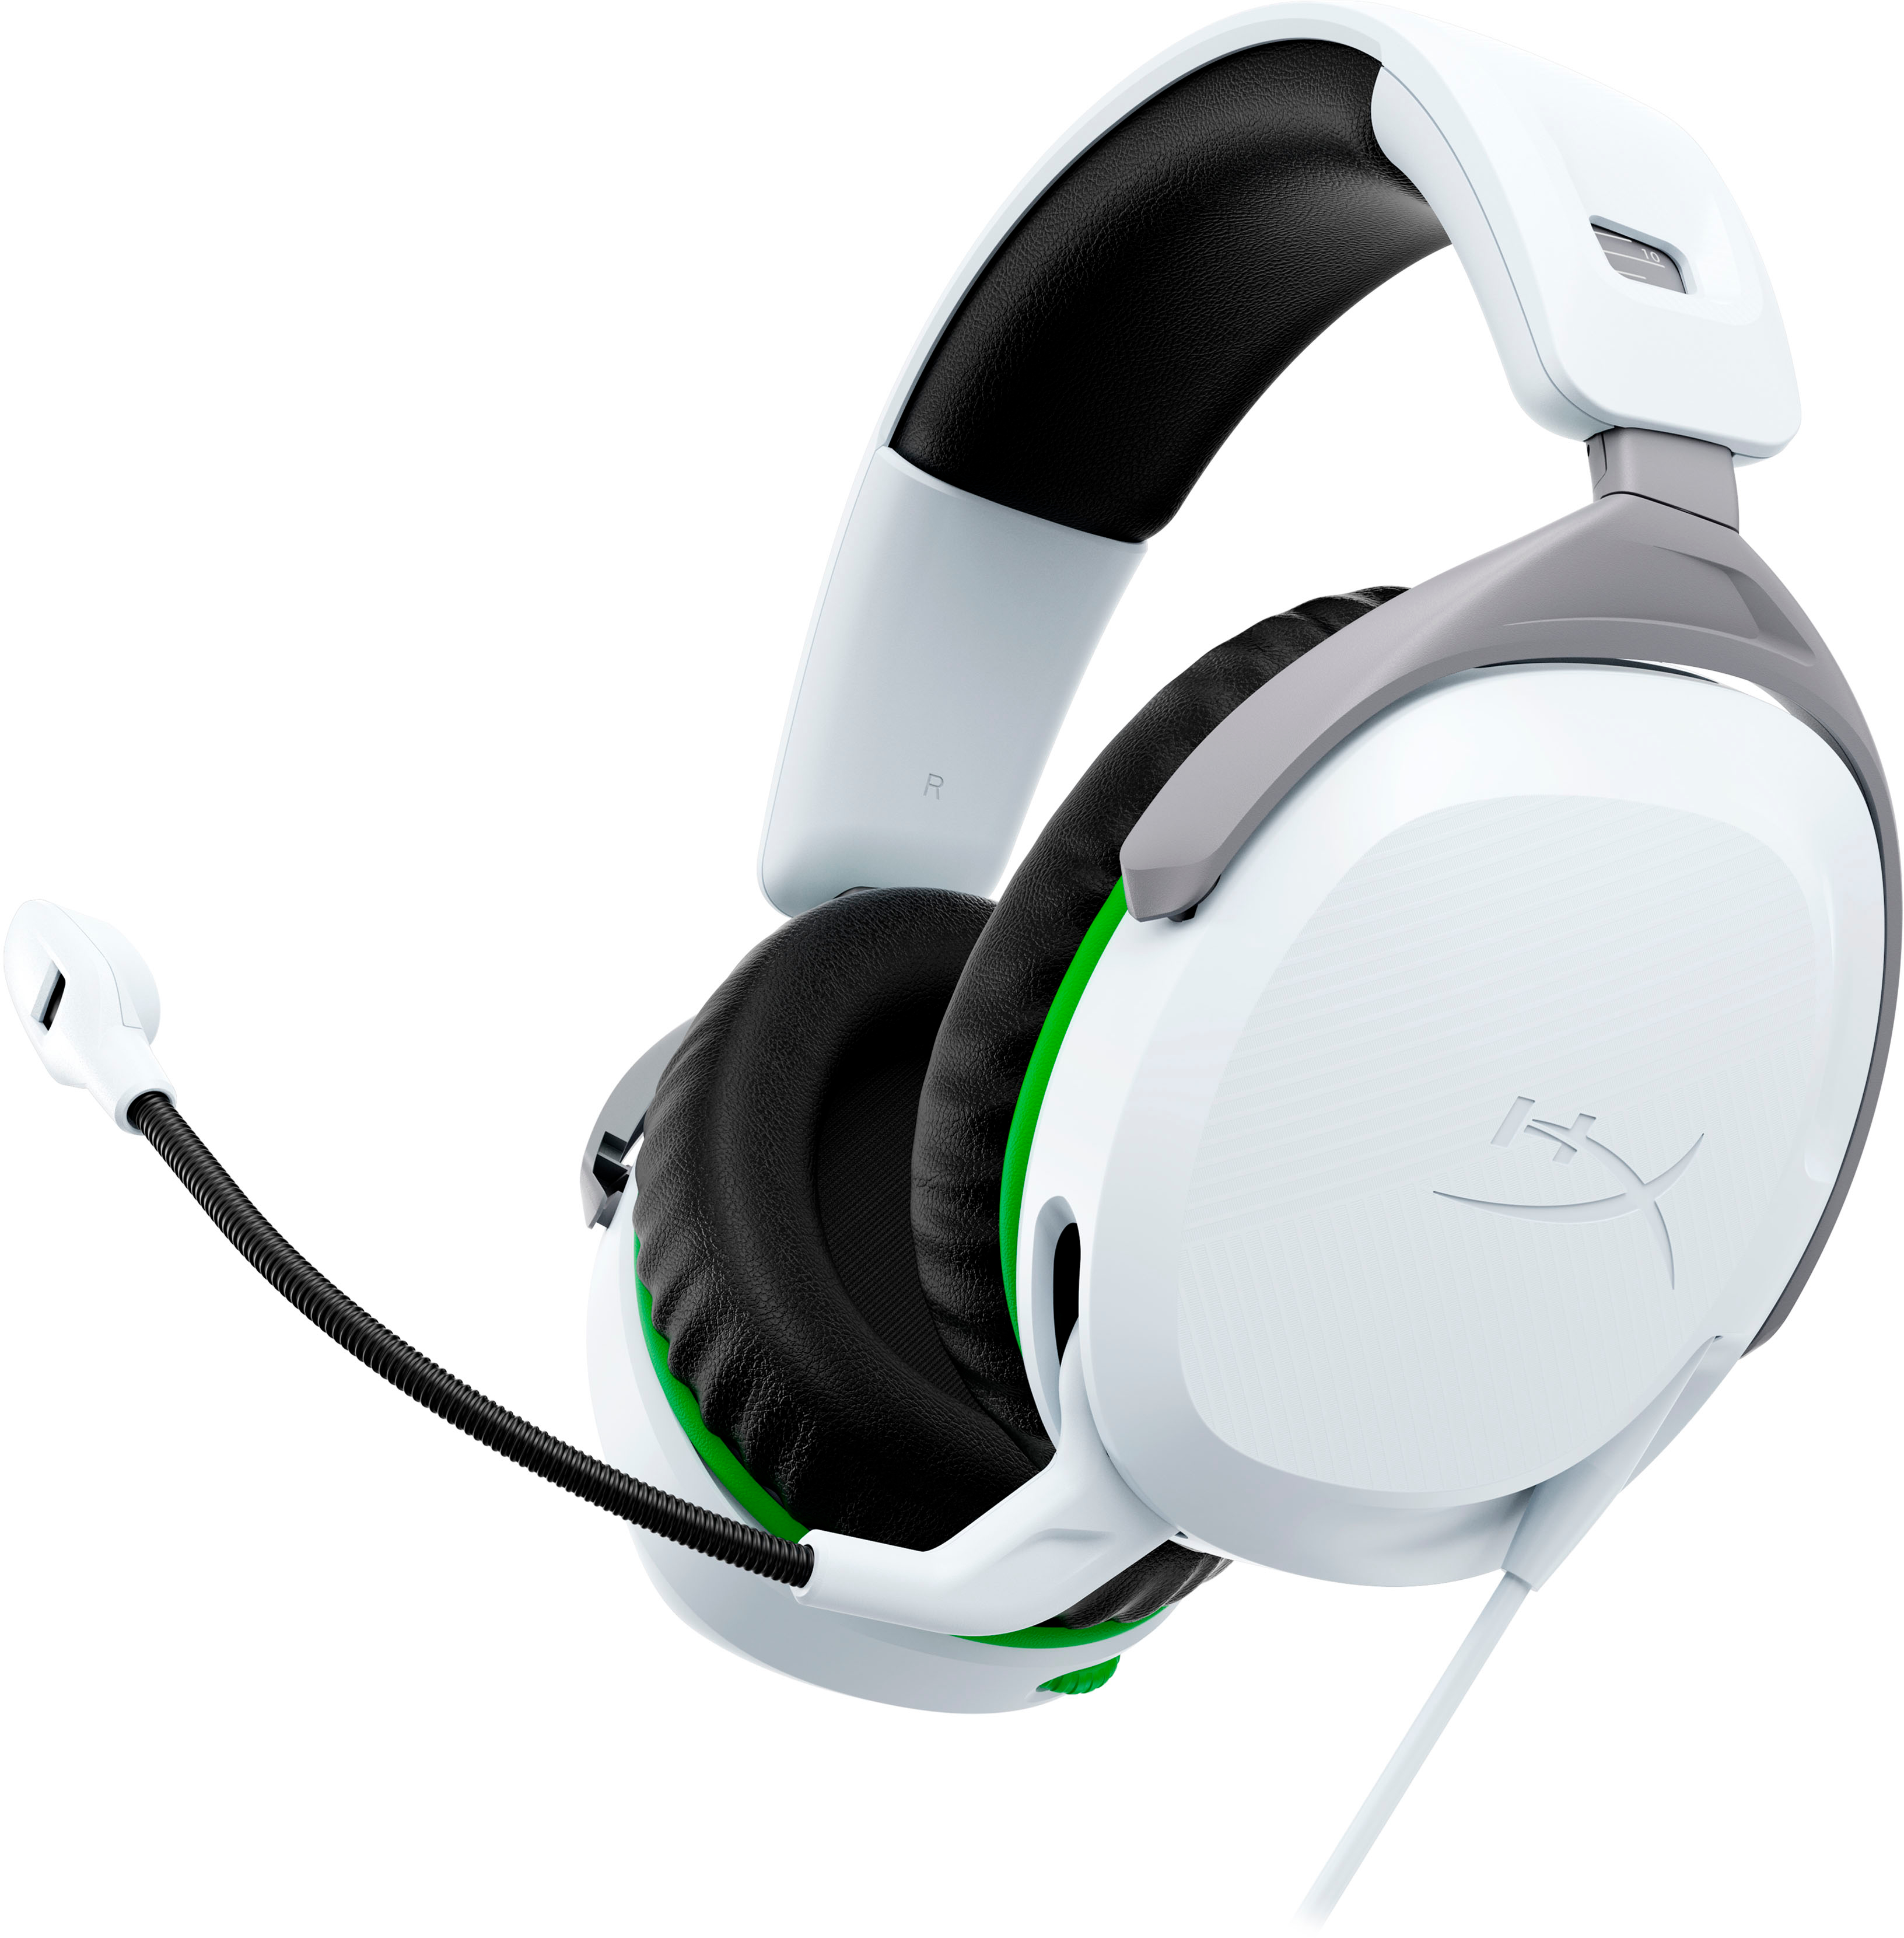 Support casque gamer SILVER passion